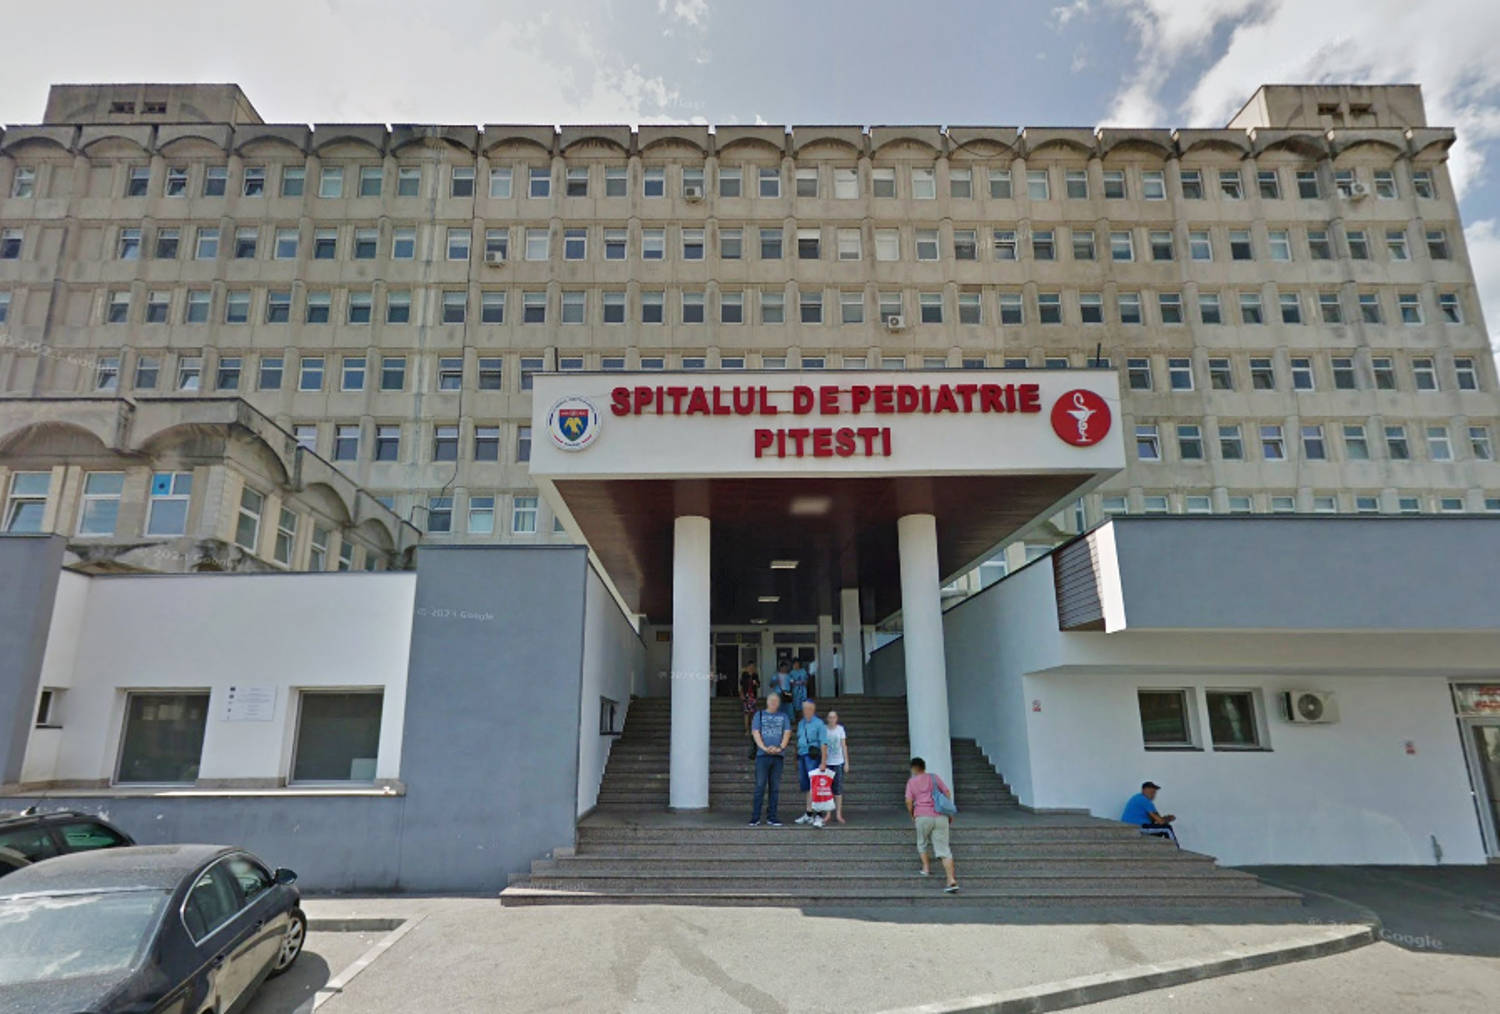 More than 100 Romanian health care facilities taken offline after cyber attacks target hospitals